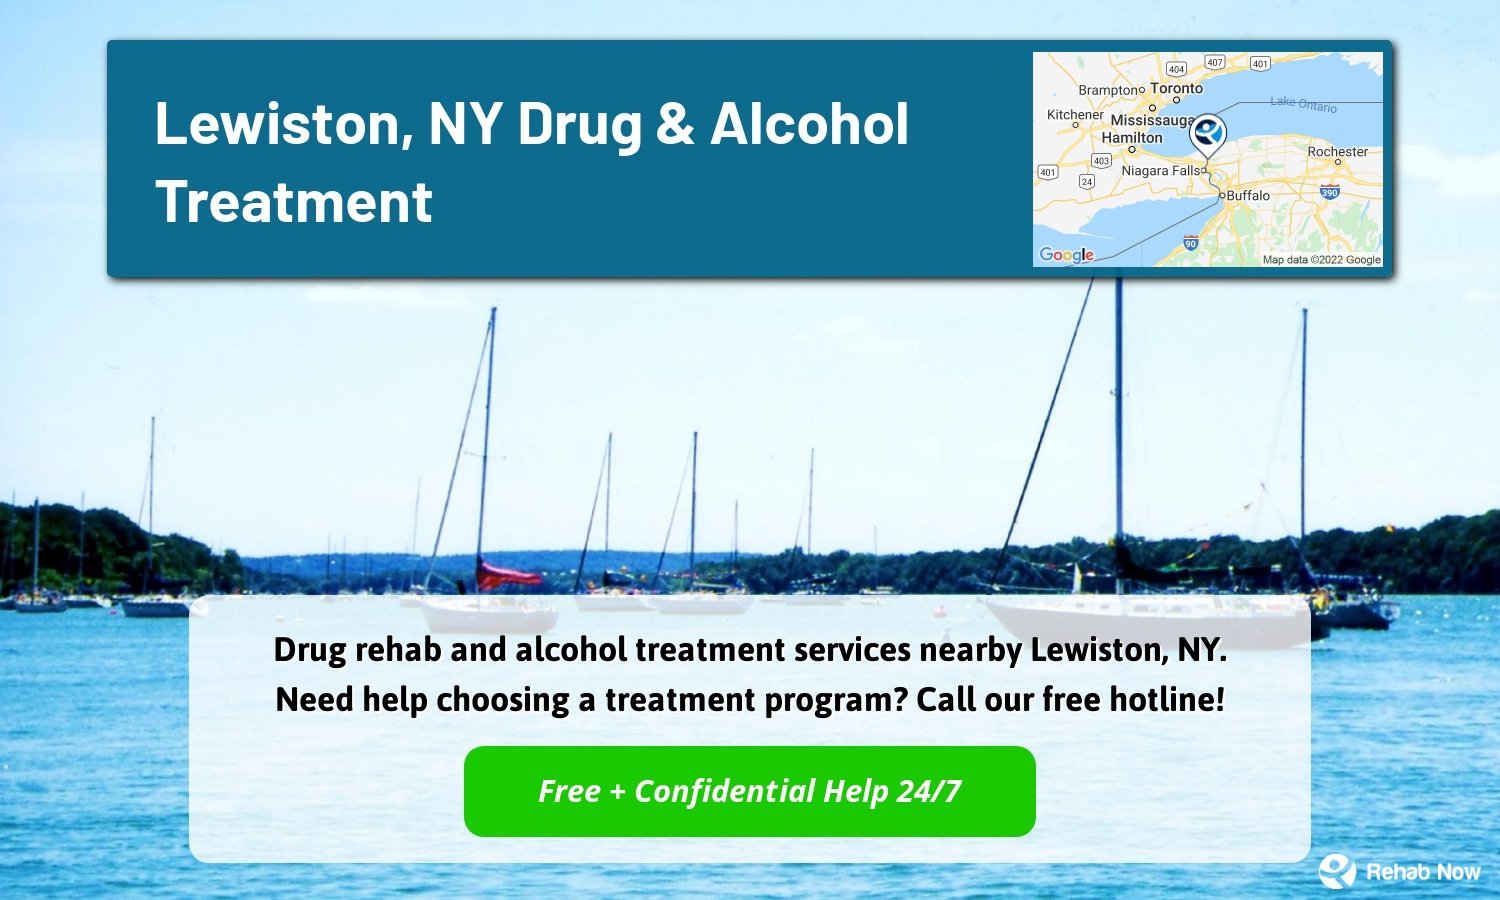 Drug rehab and alcohol treatment services nearby Lewiston, NY. Need help choosing a treatment program? Call our free hotline!